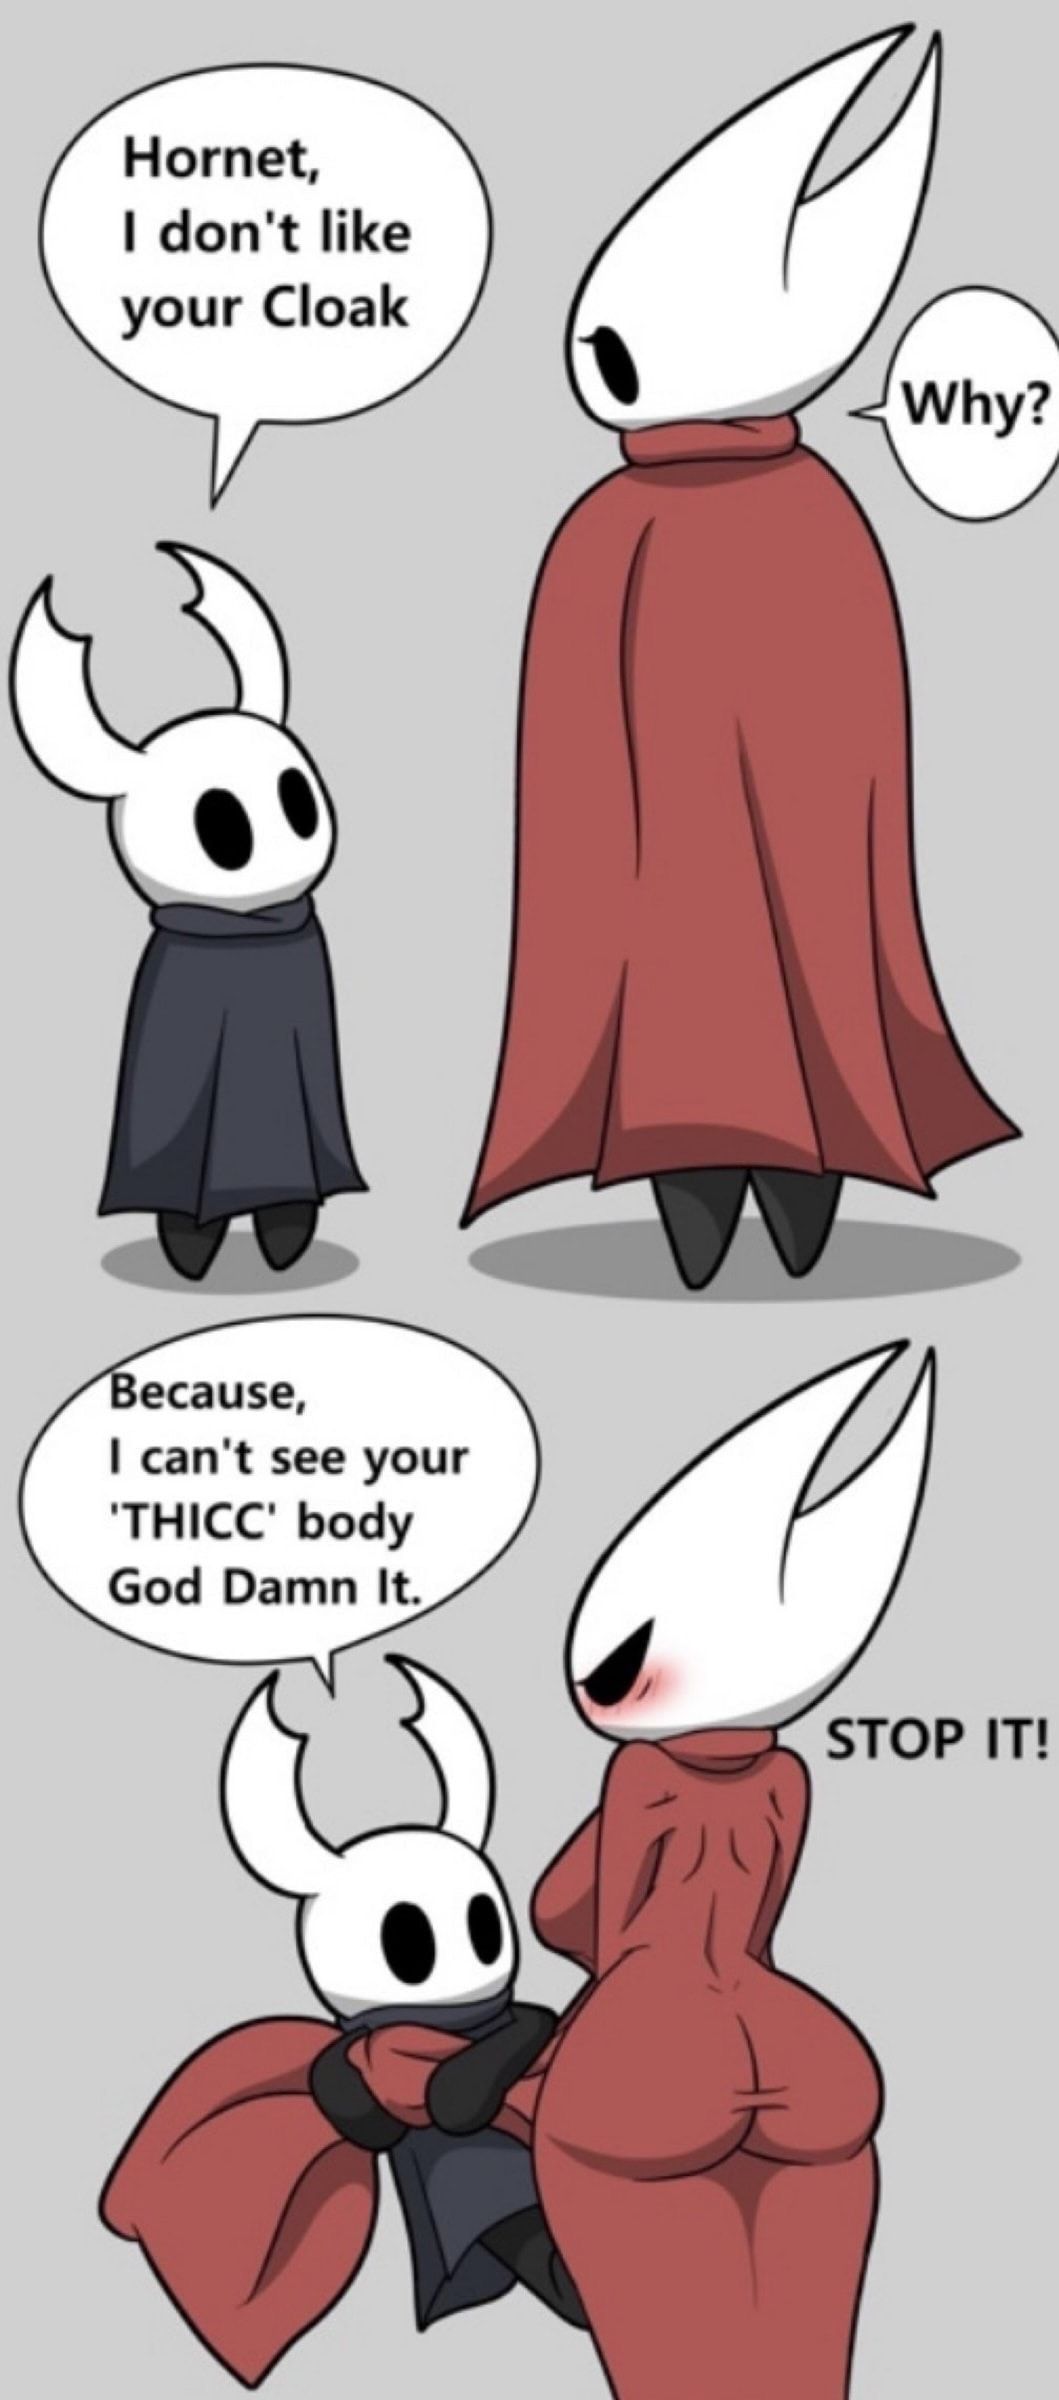 For all you Hollow Knight fans